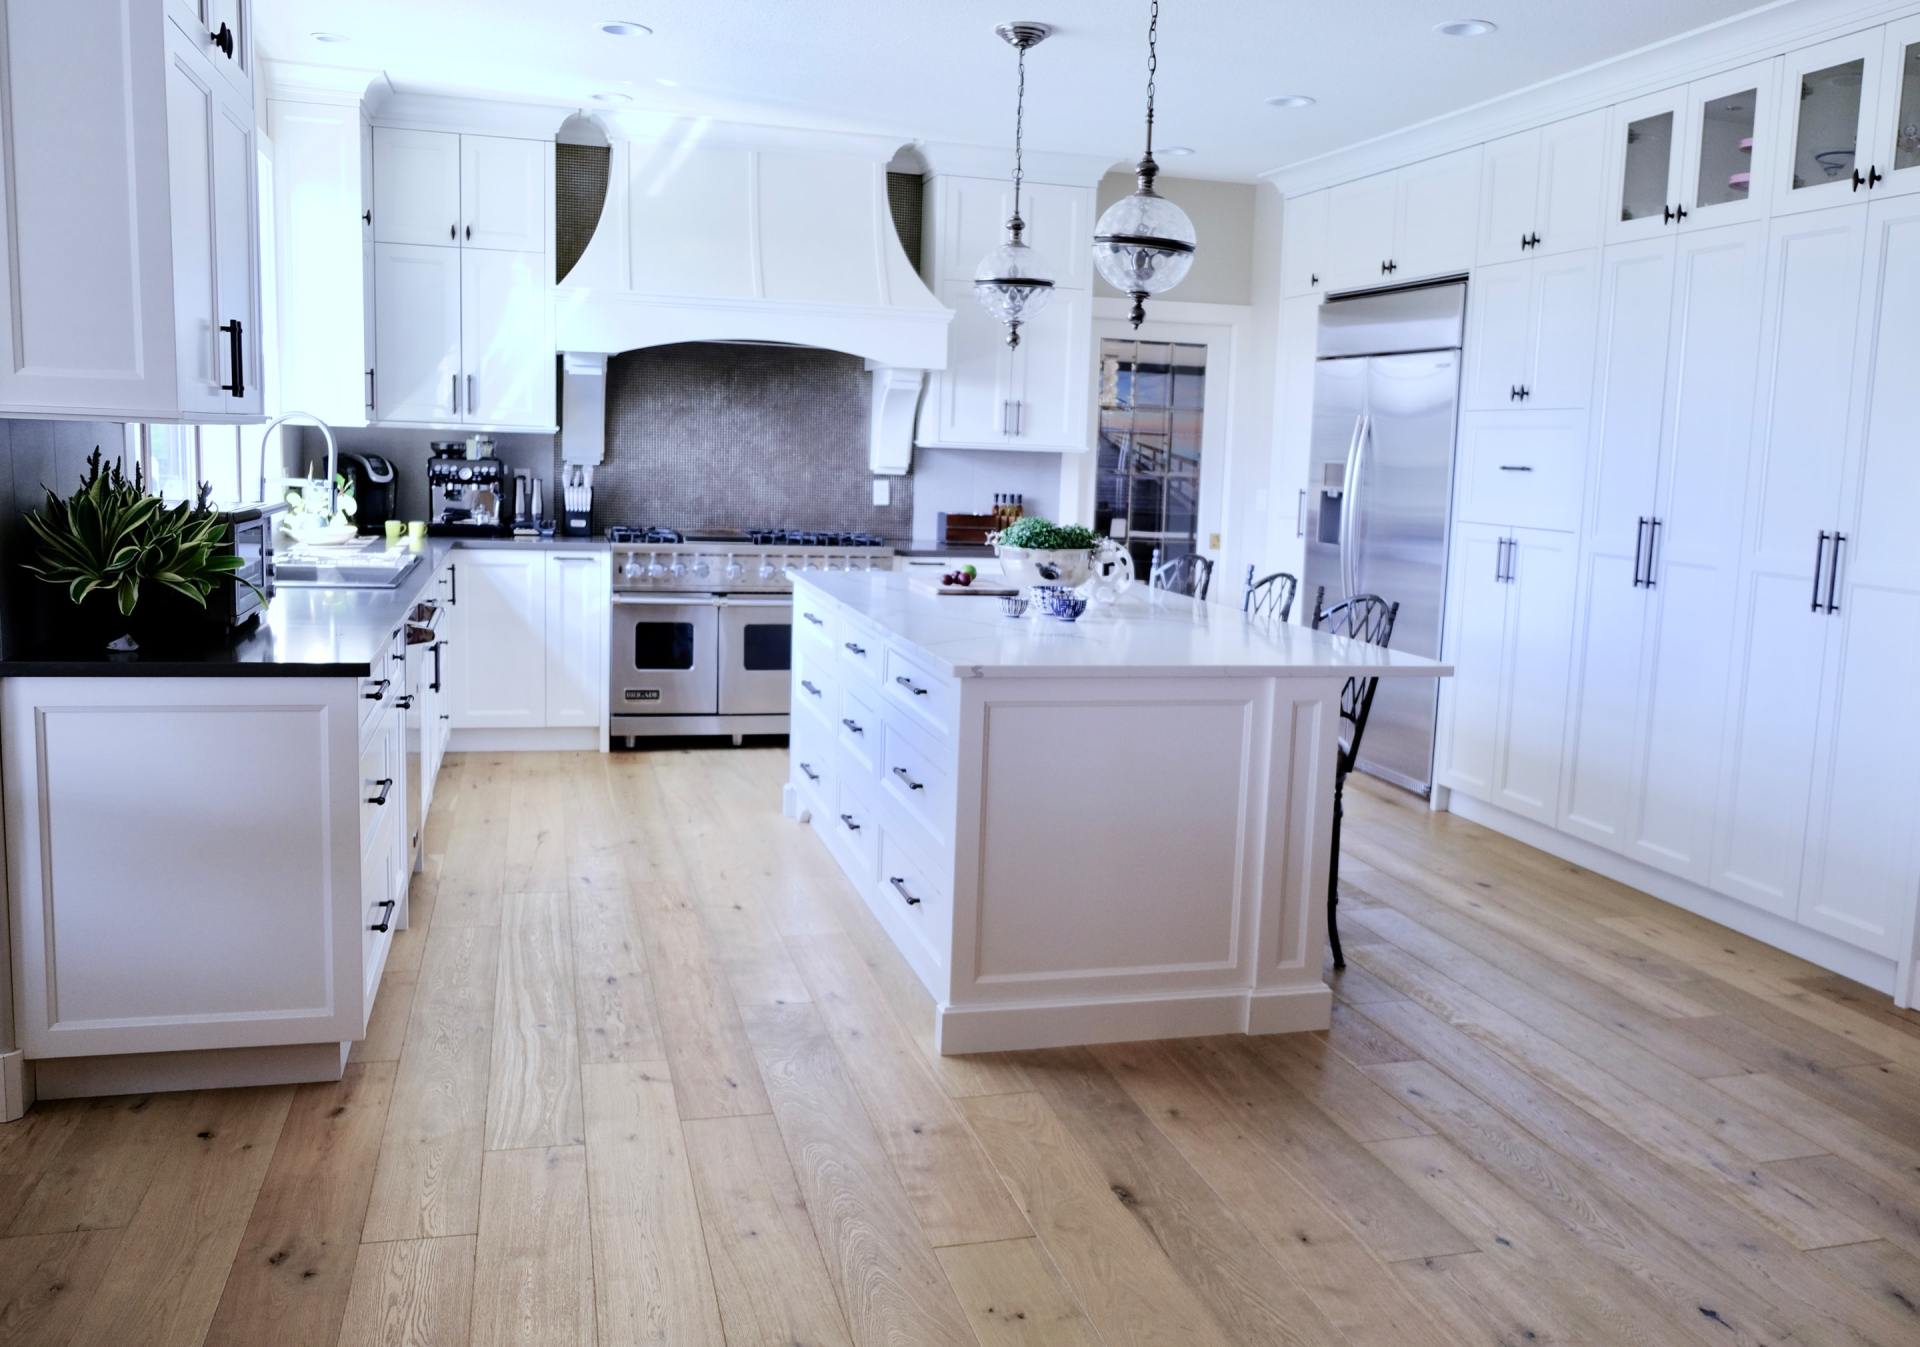 Why Paint Cabinets How To, How To Paint Kitchen Cabinets White Professionally